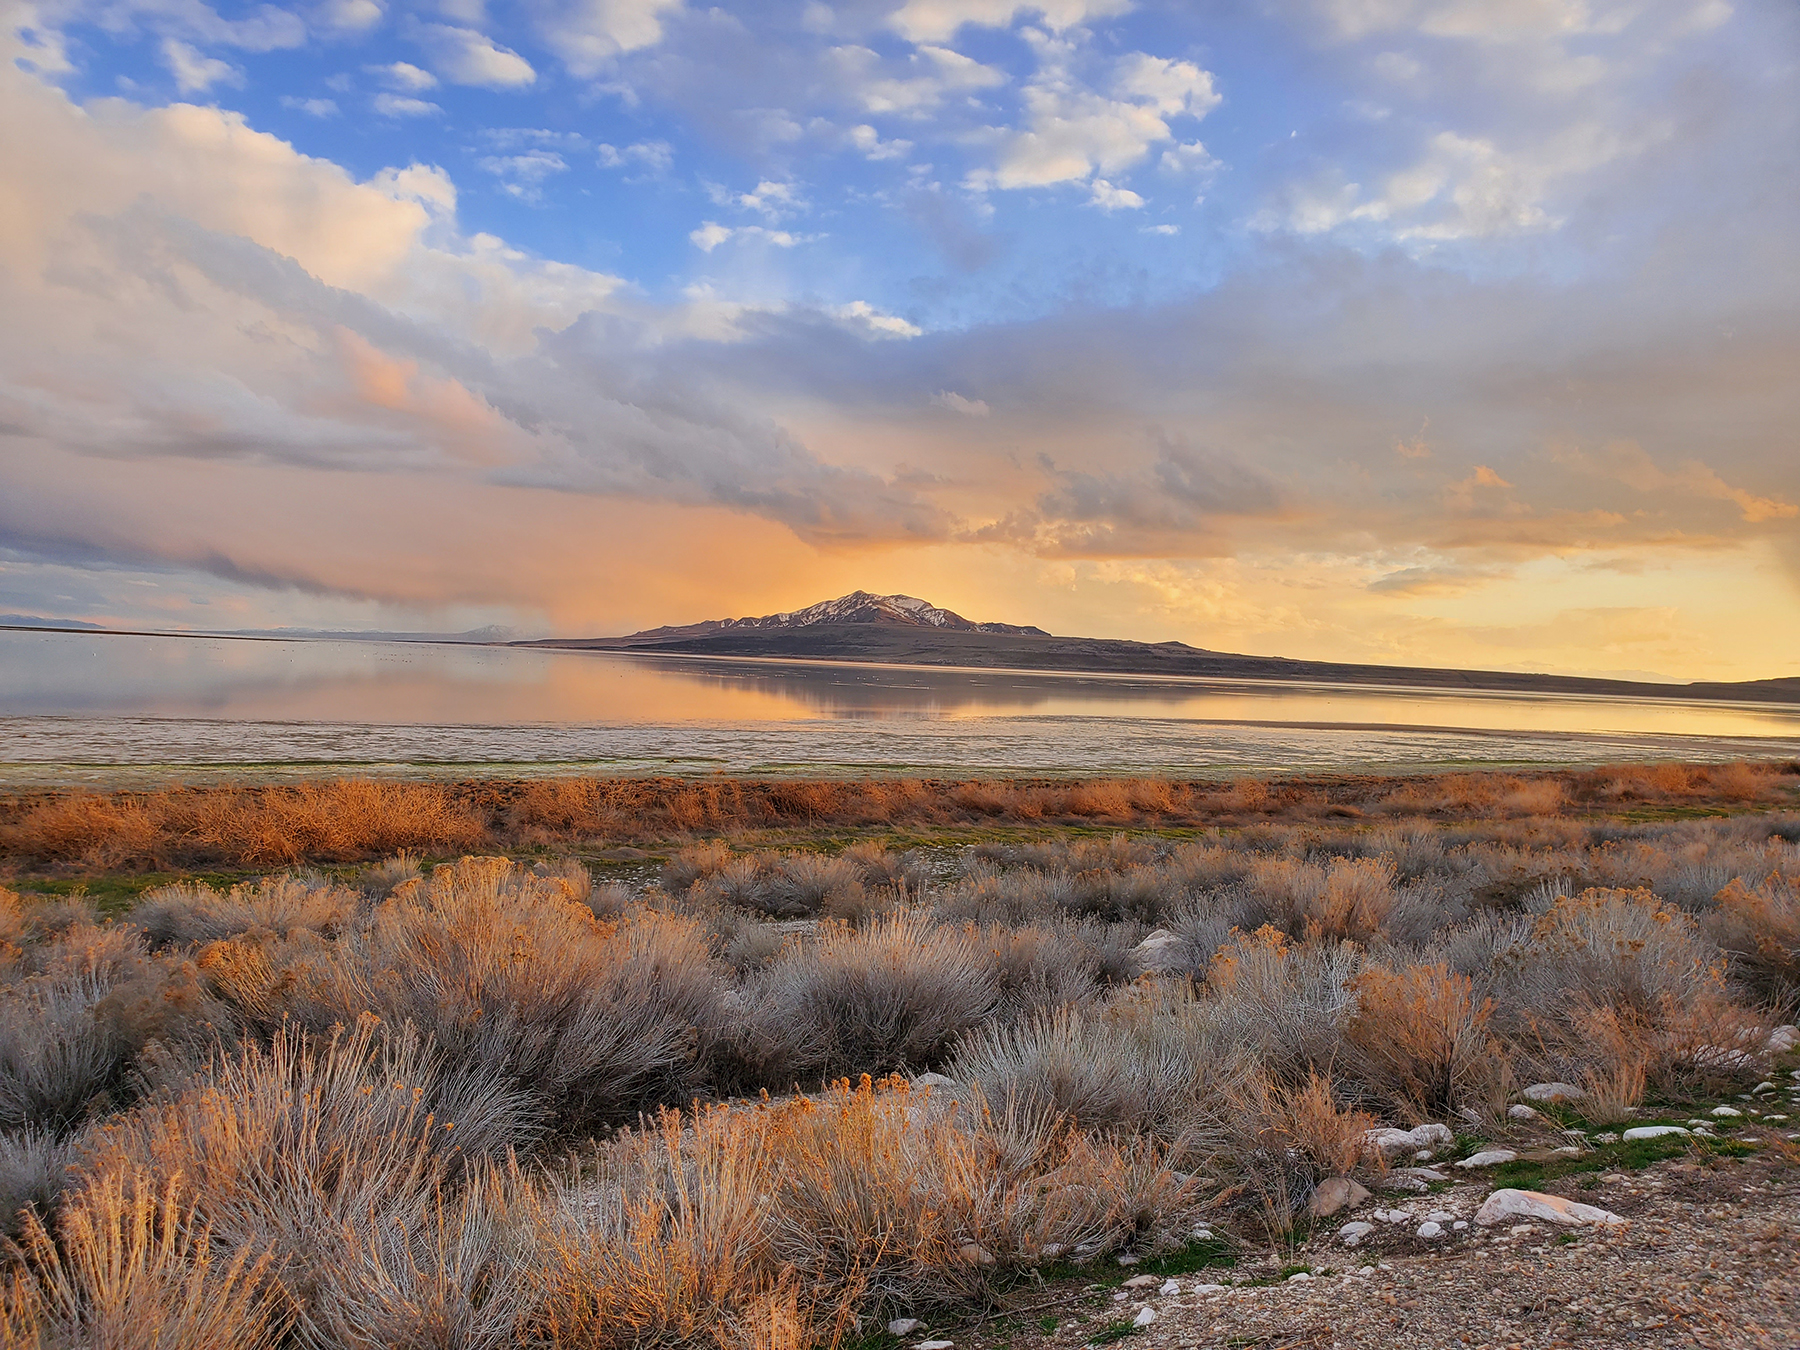 Antelope Island is the largest island in the Great Salt Lake. When the lake drops significantly in elevation, the island becomes a peninsula. (Image courtesy of Utah Department of Natural Resources)